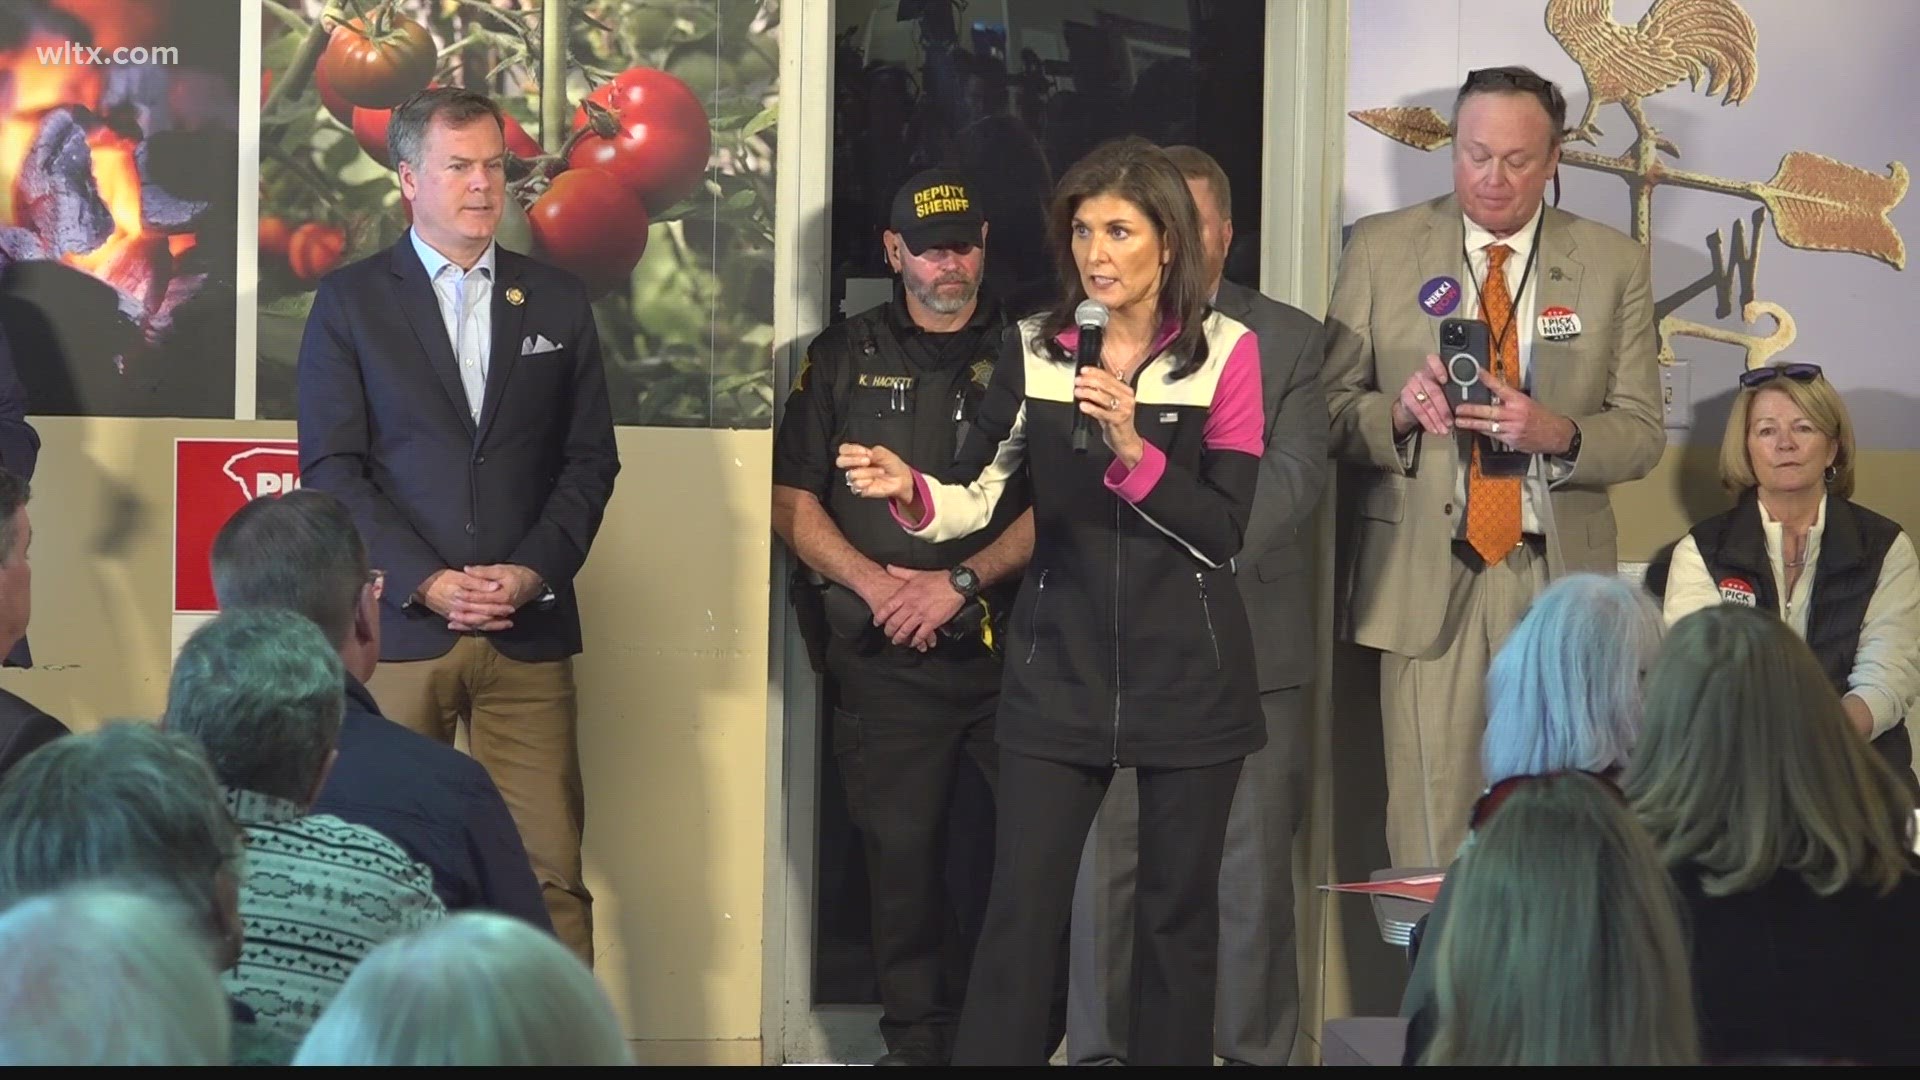 Haley made a stop in Columbia as she was campaigning across the state in advance of the Republican primary.